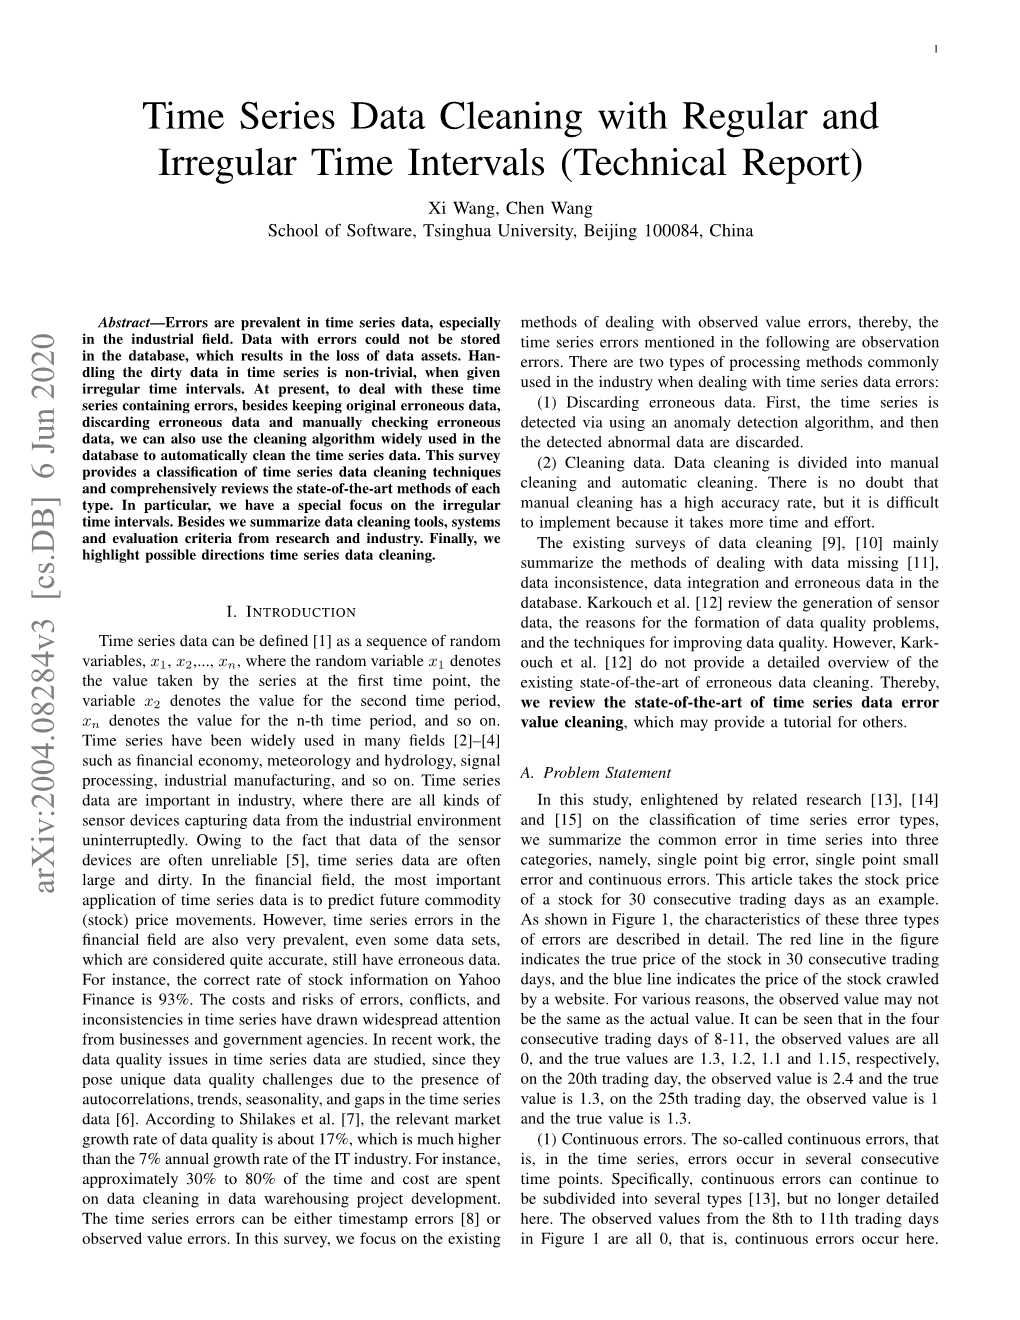 Time Series Data Cleaning with Regular and Irregular Time